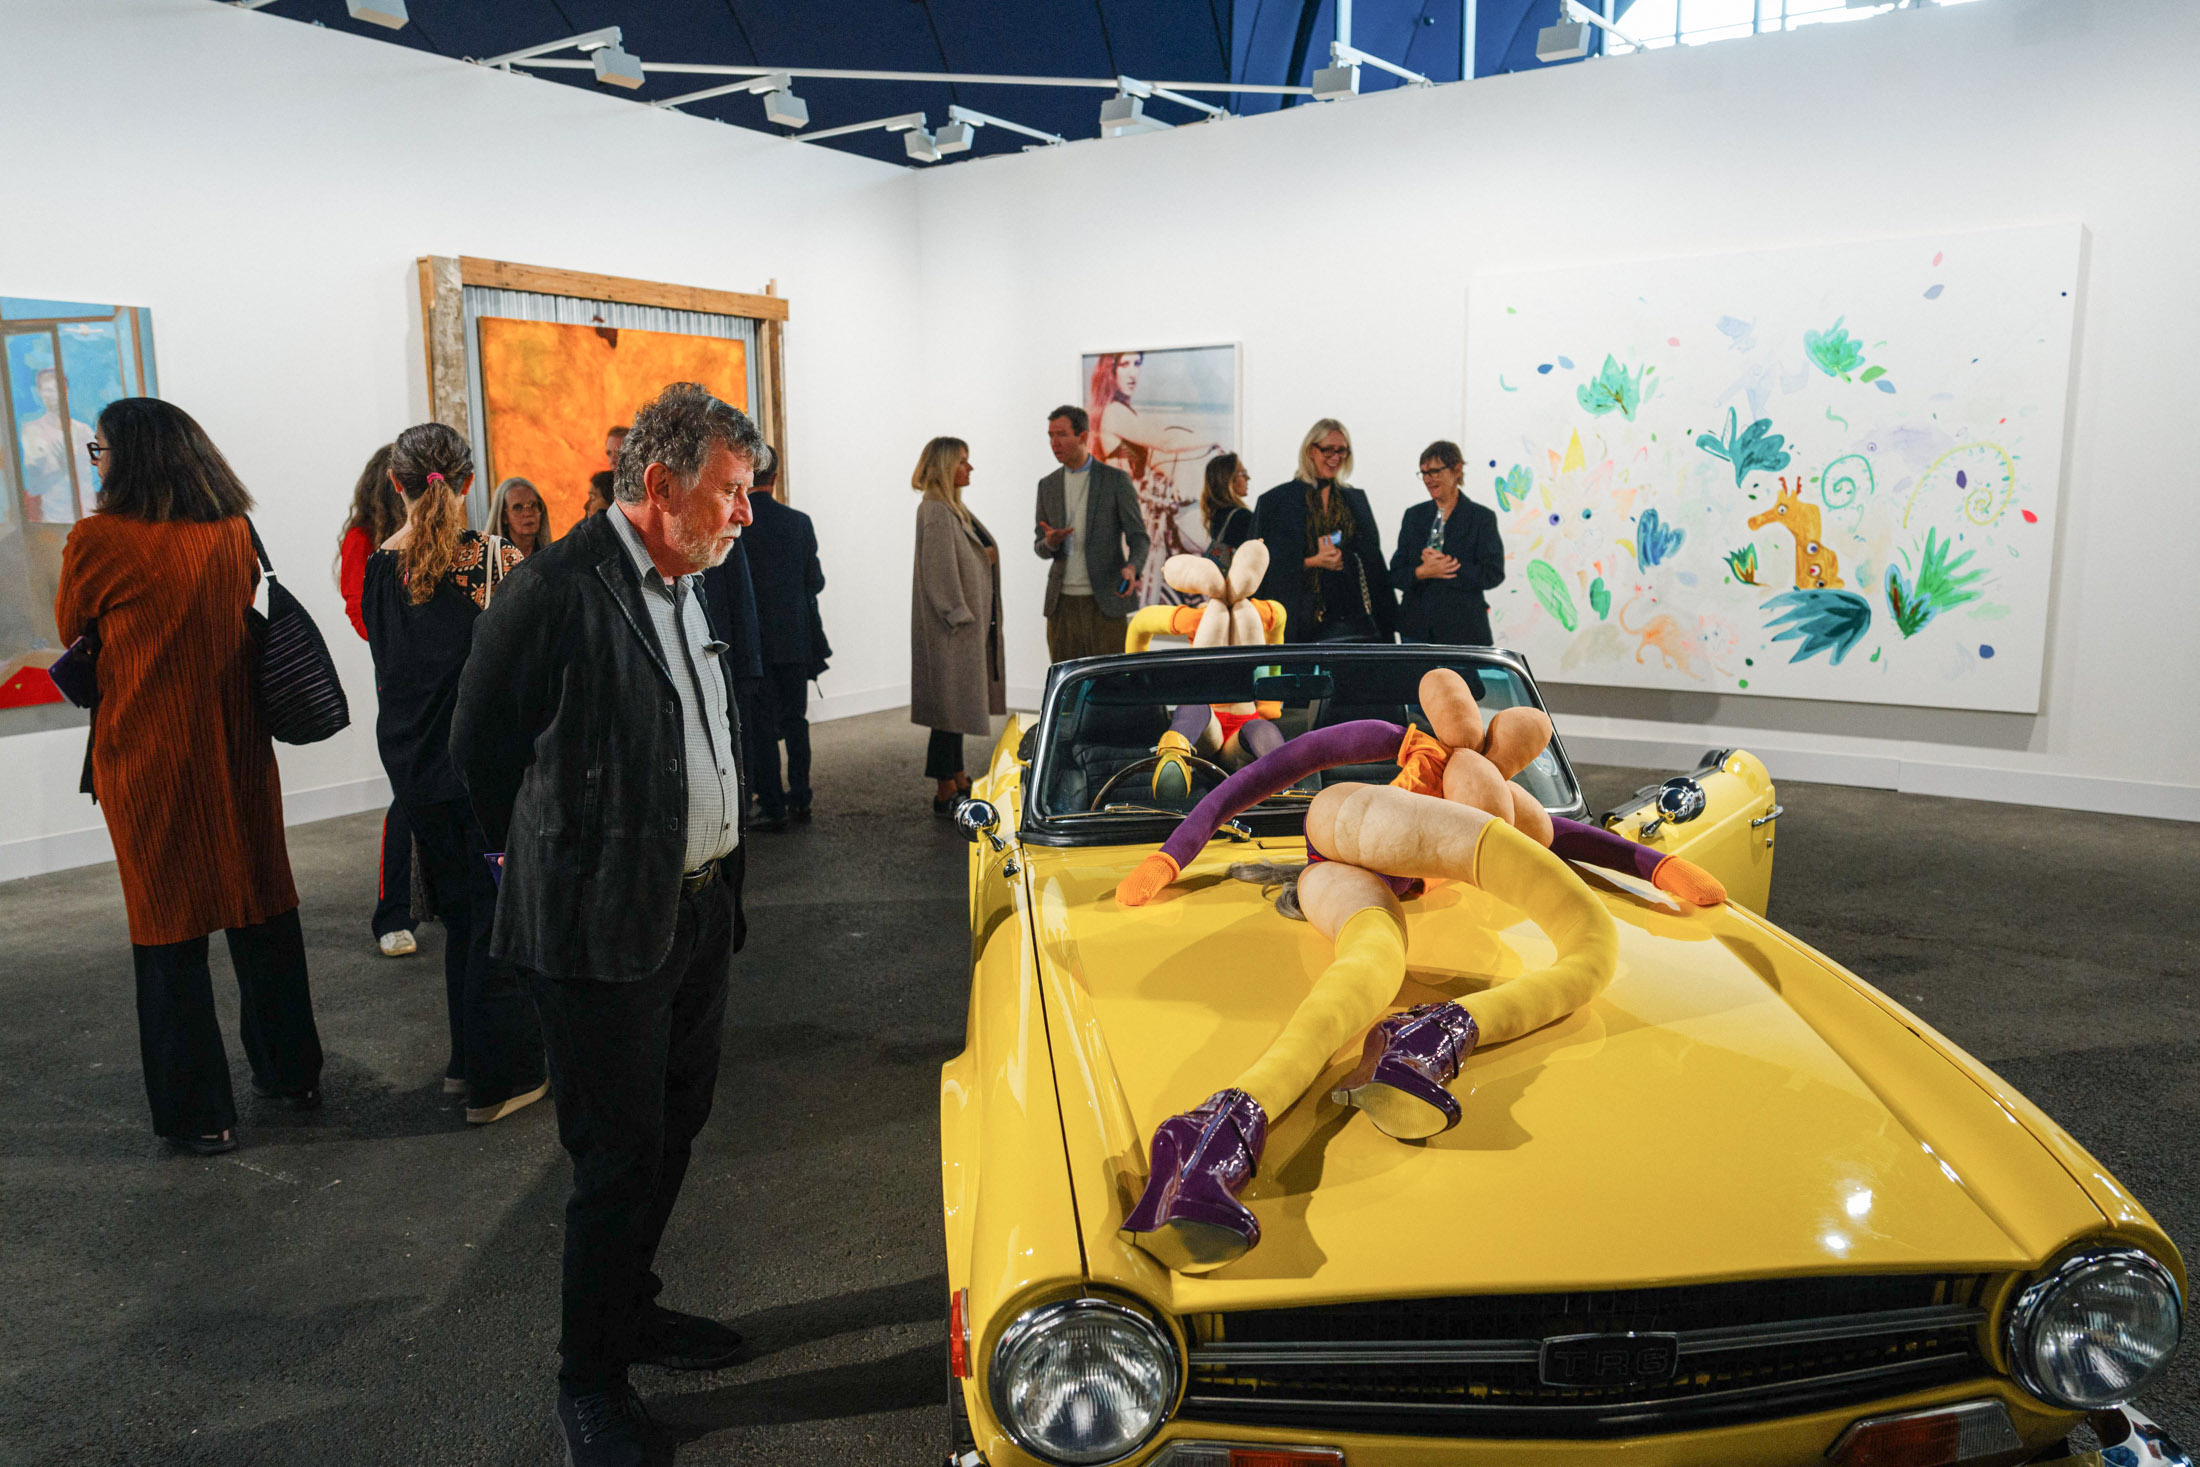 Soft Art Market Sends Collectors on Search for the Next Big Trend in Art -  Bloomberg